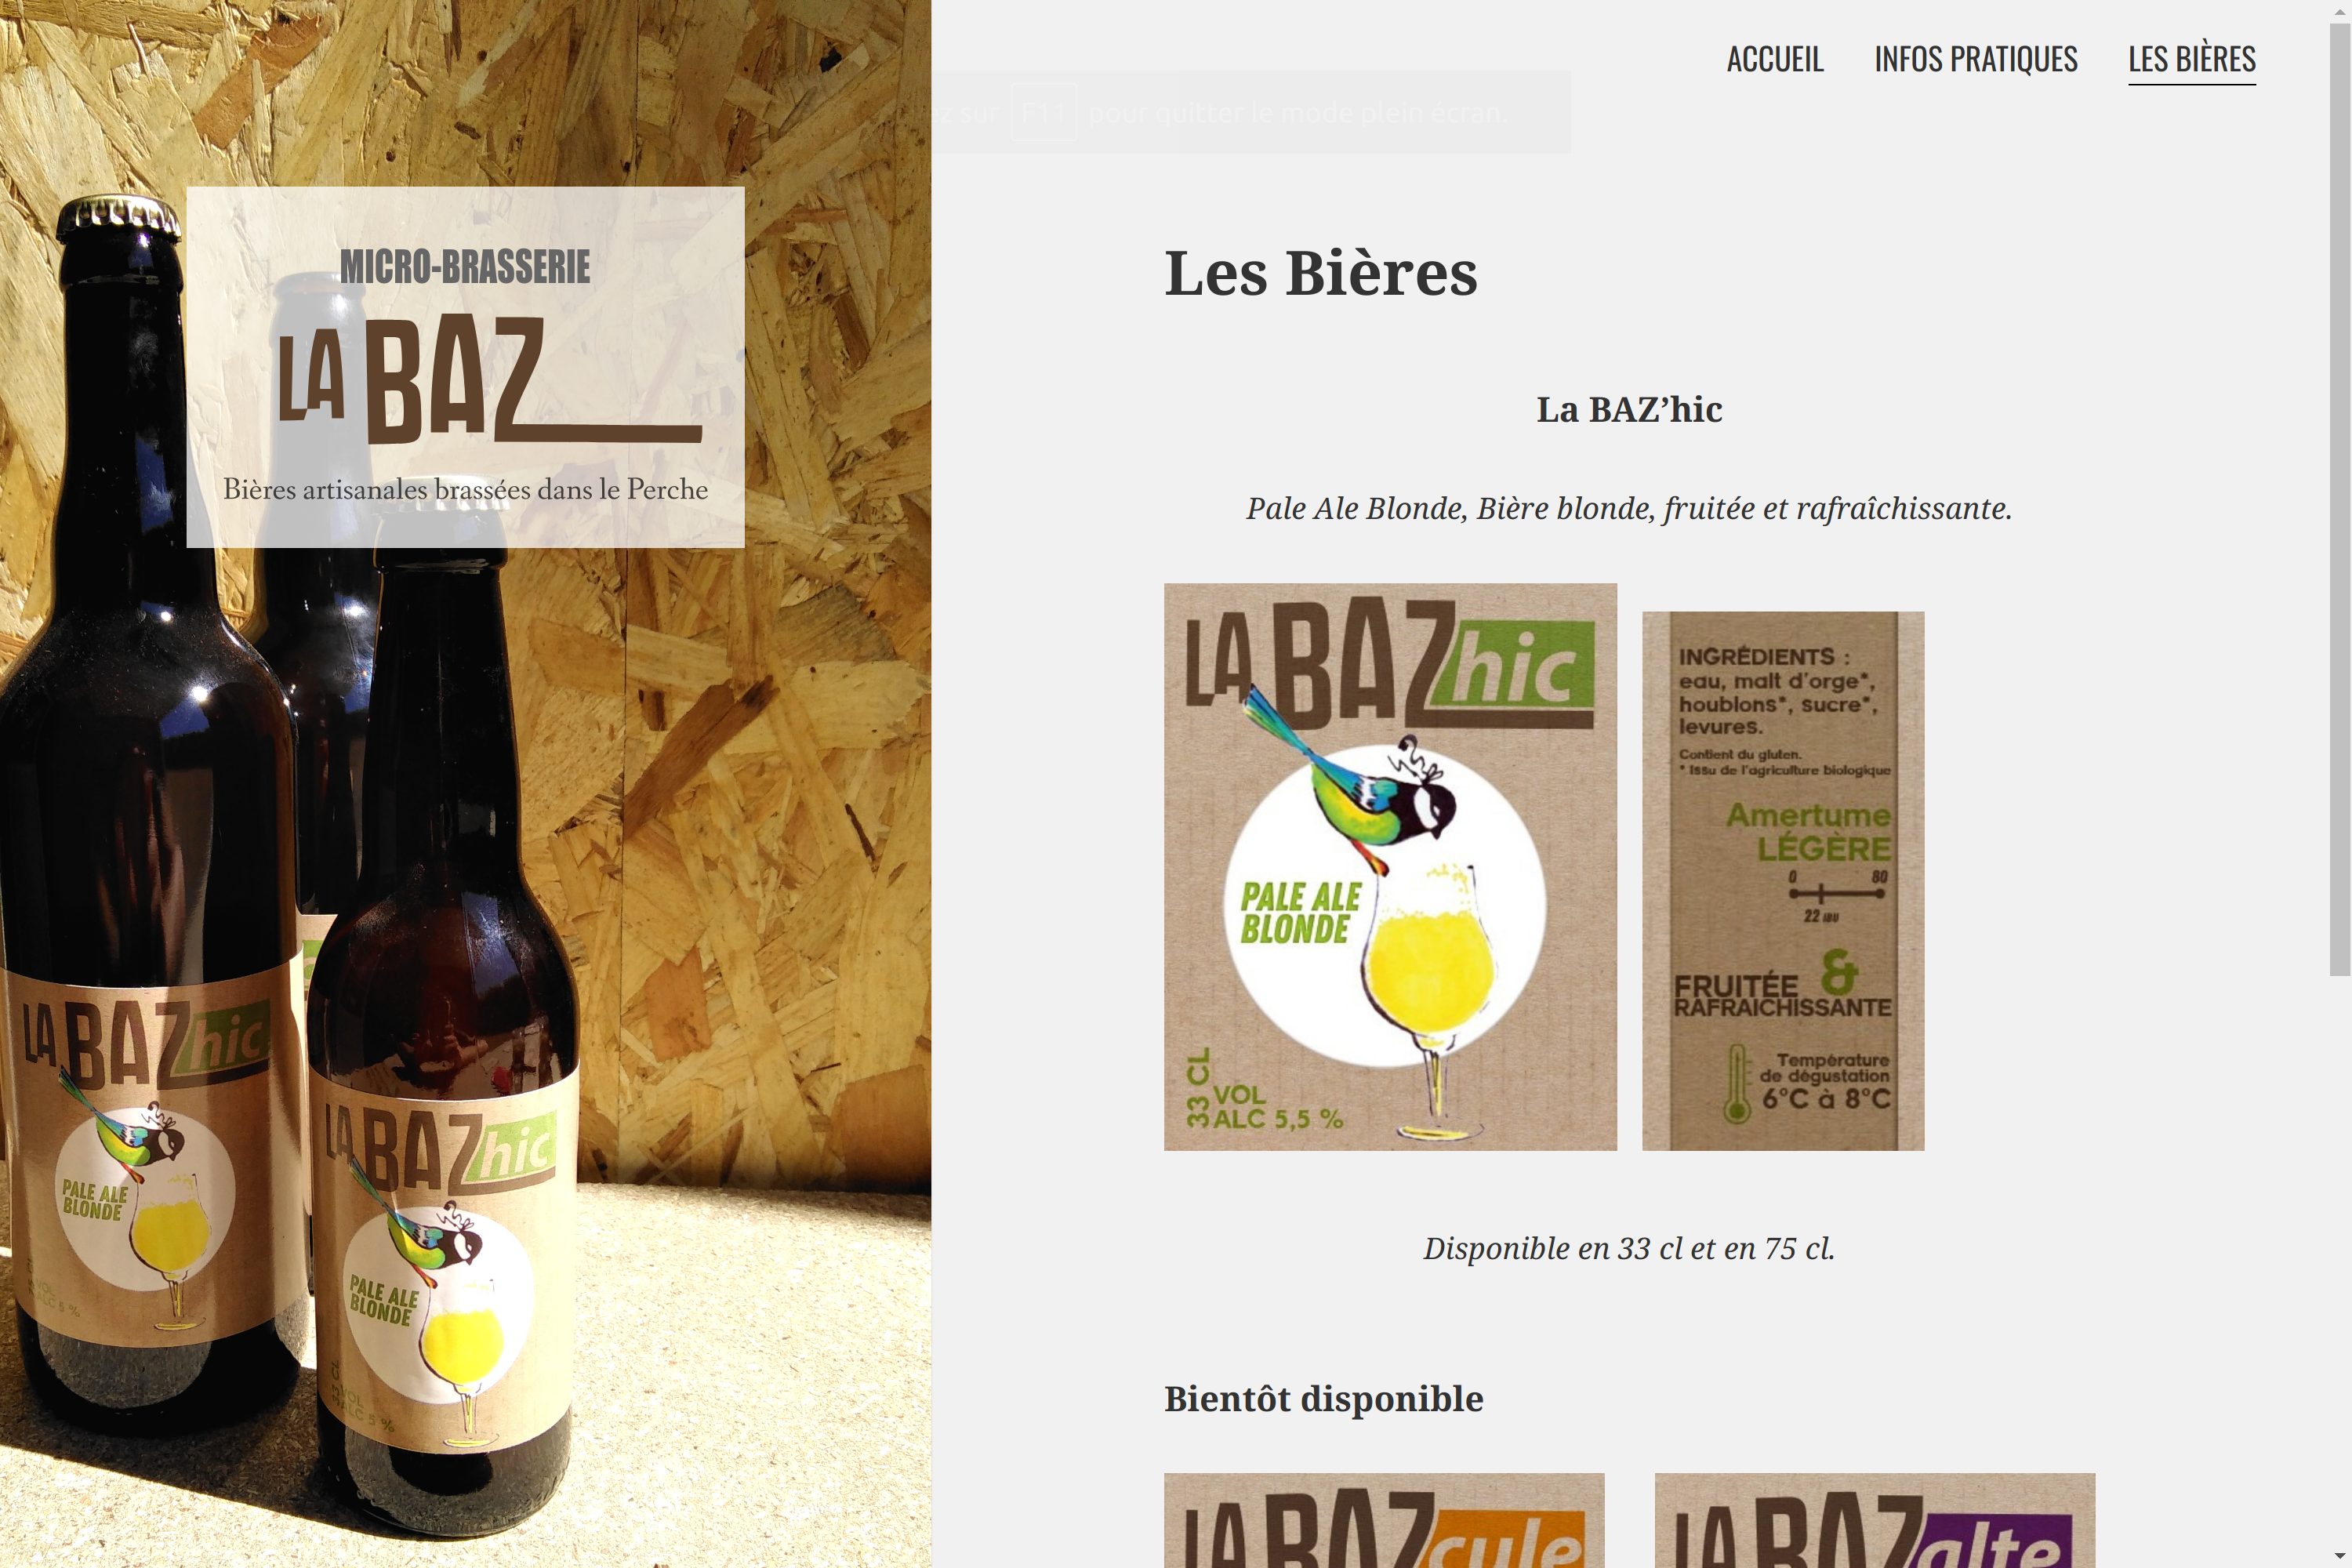 Website of the microbrewery "La Baz"